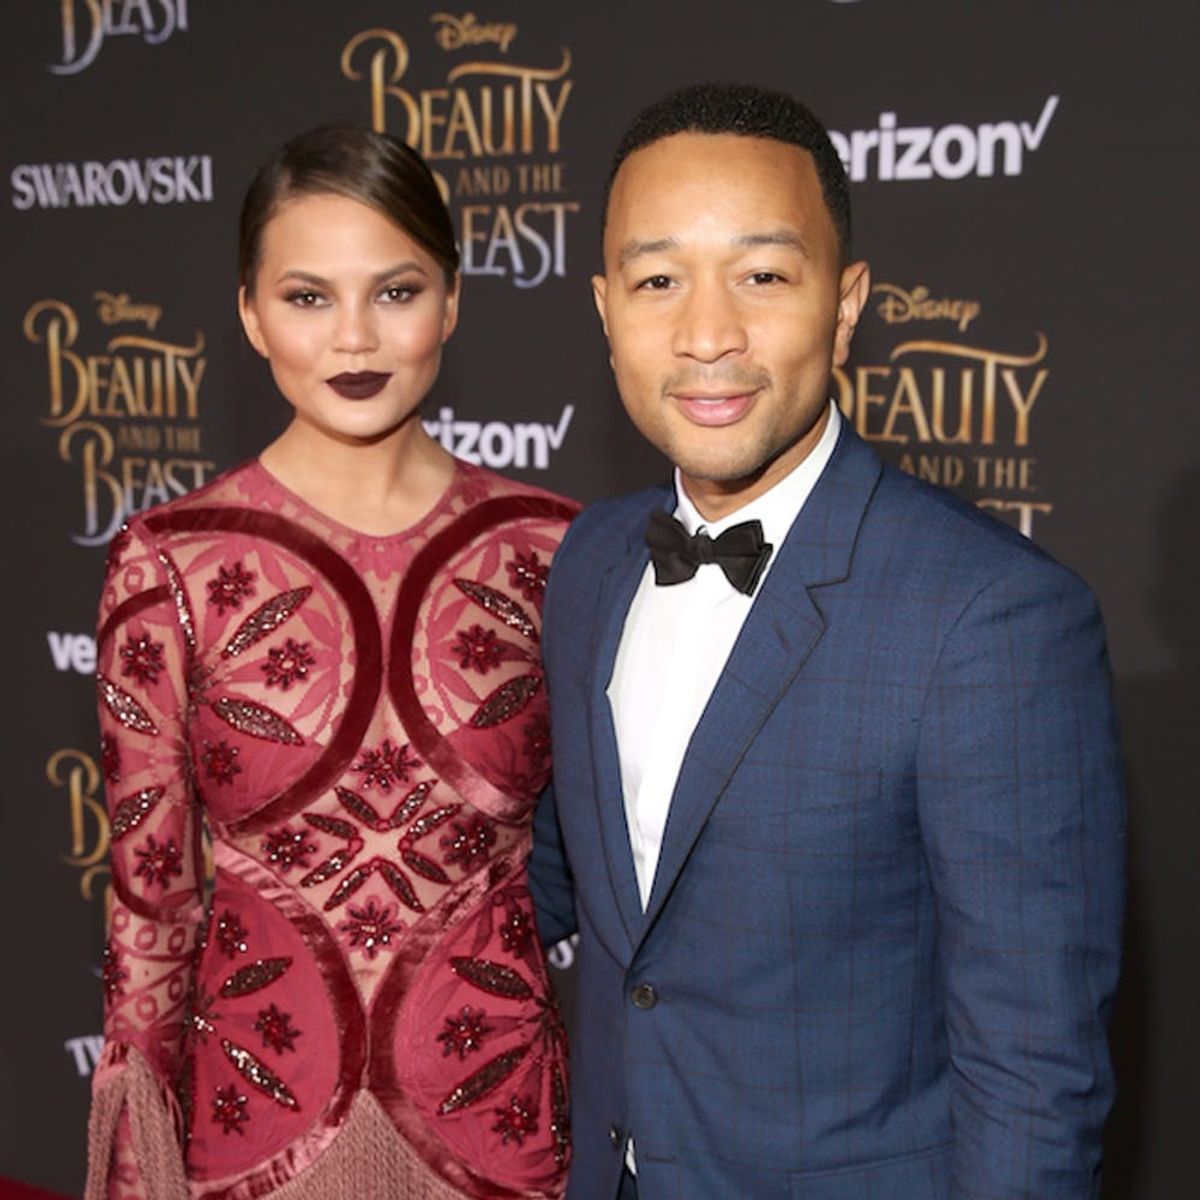 Chrissy Teigen and John Legend Had a Prom-Style Date Night